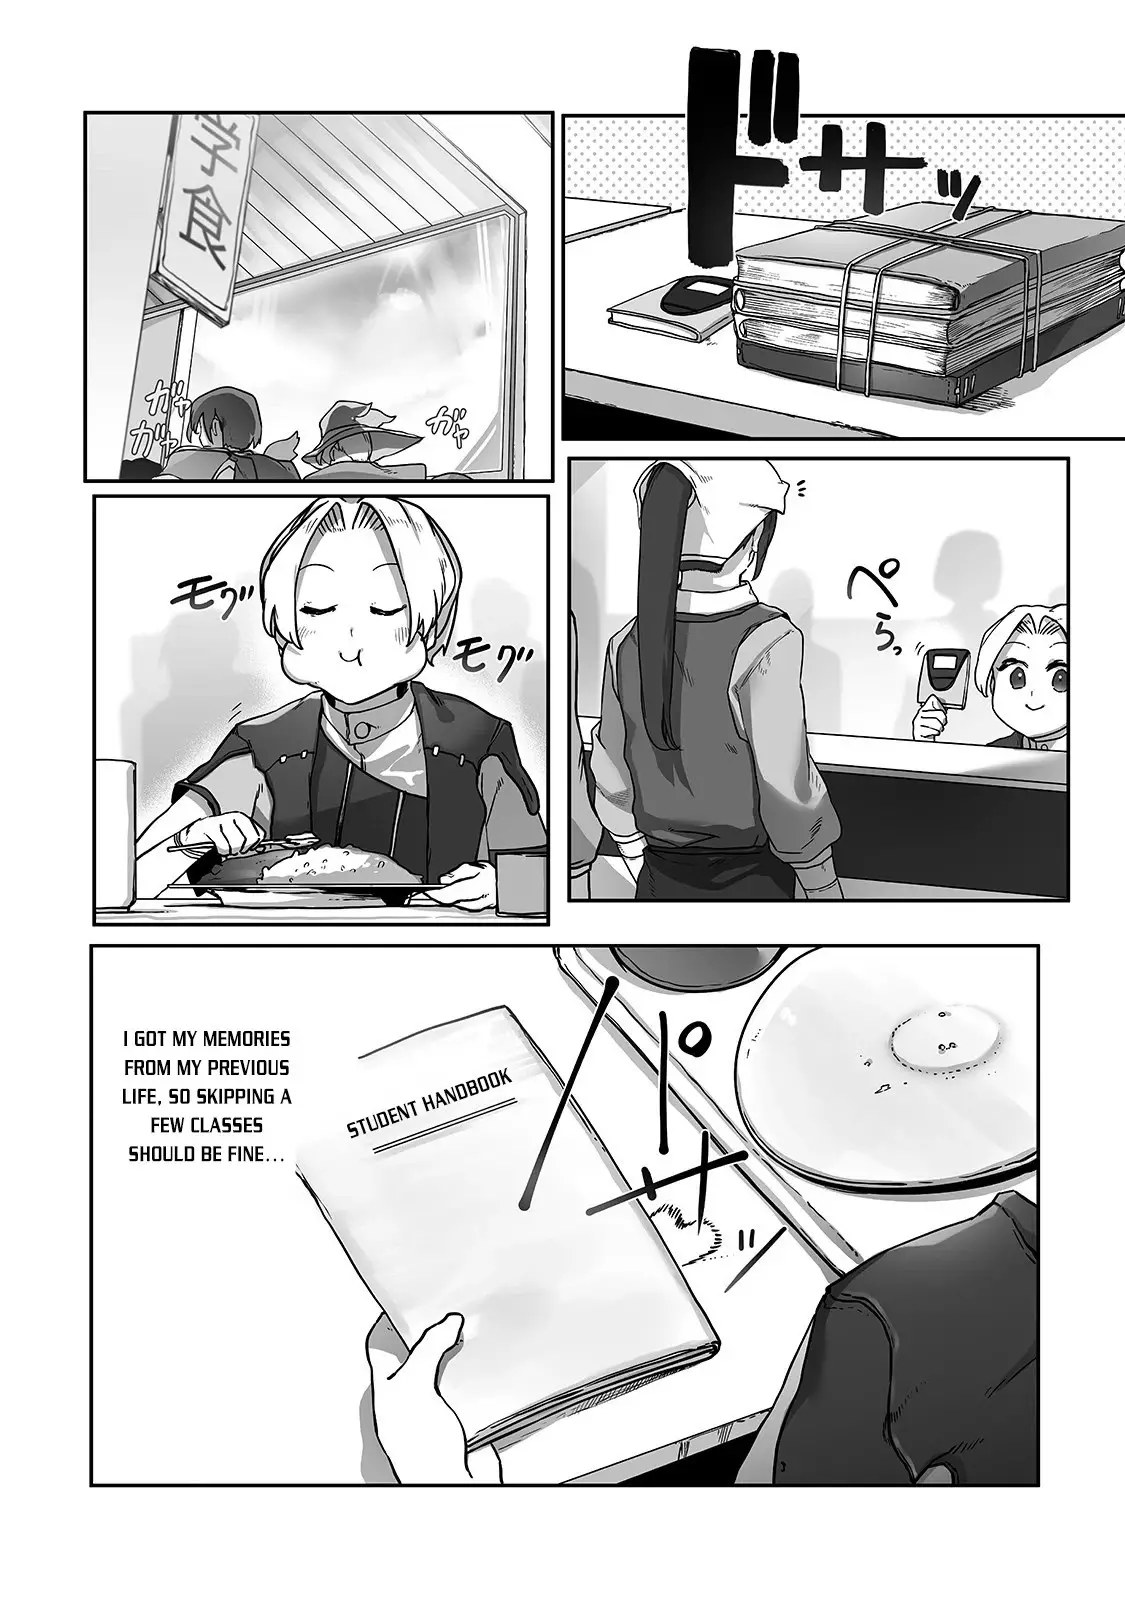 The Useless Tamer Will Turn Into The Top Unconsciously By My Previous Life Knowledge - 9 page 11